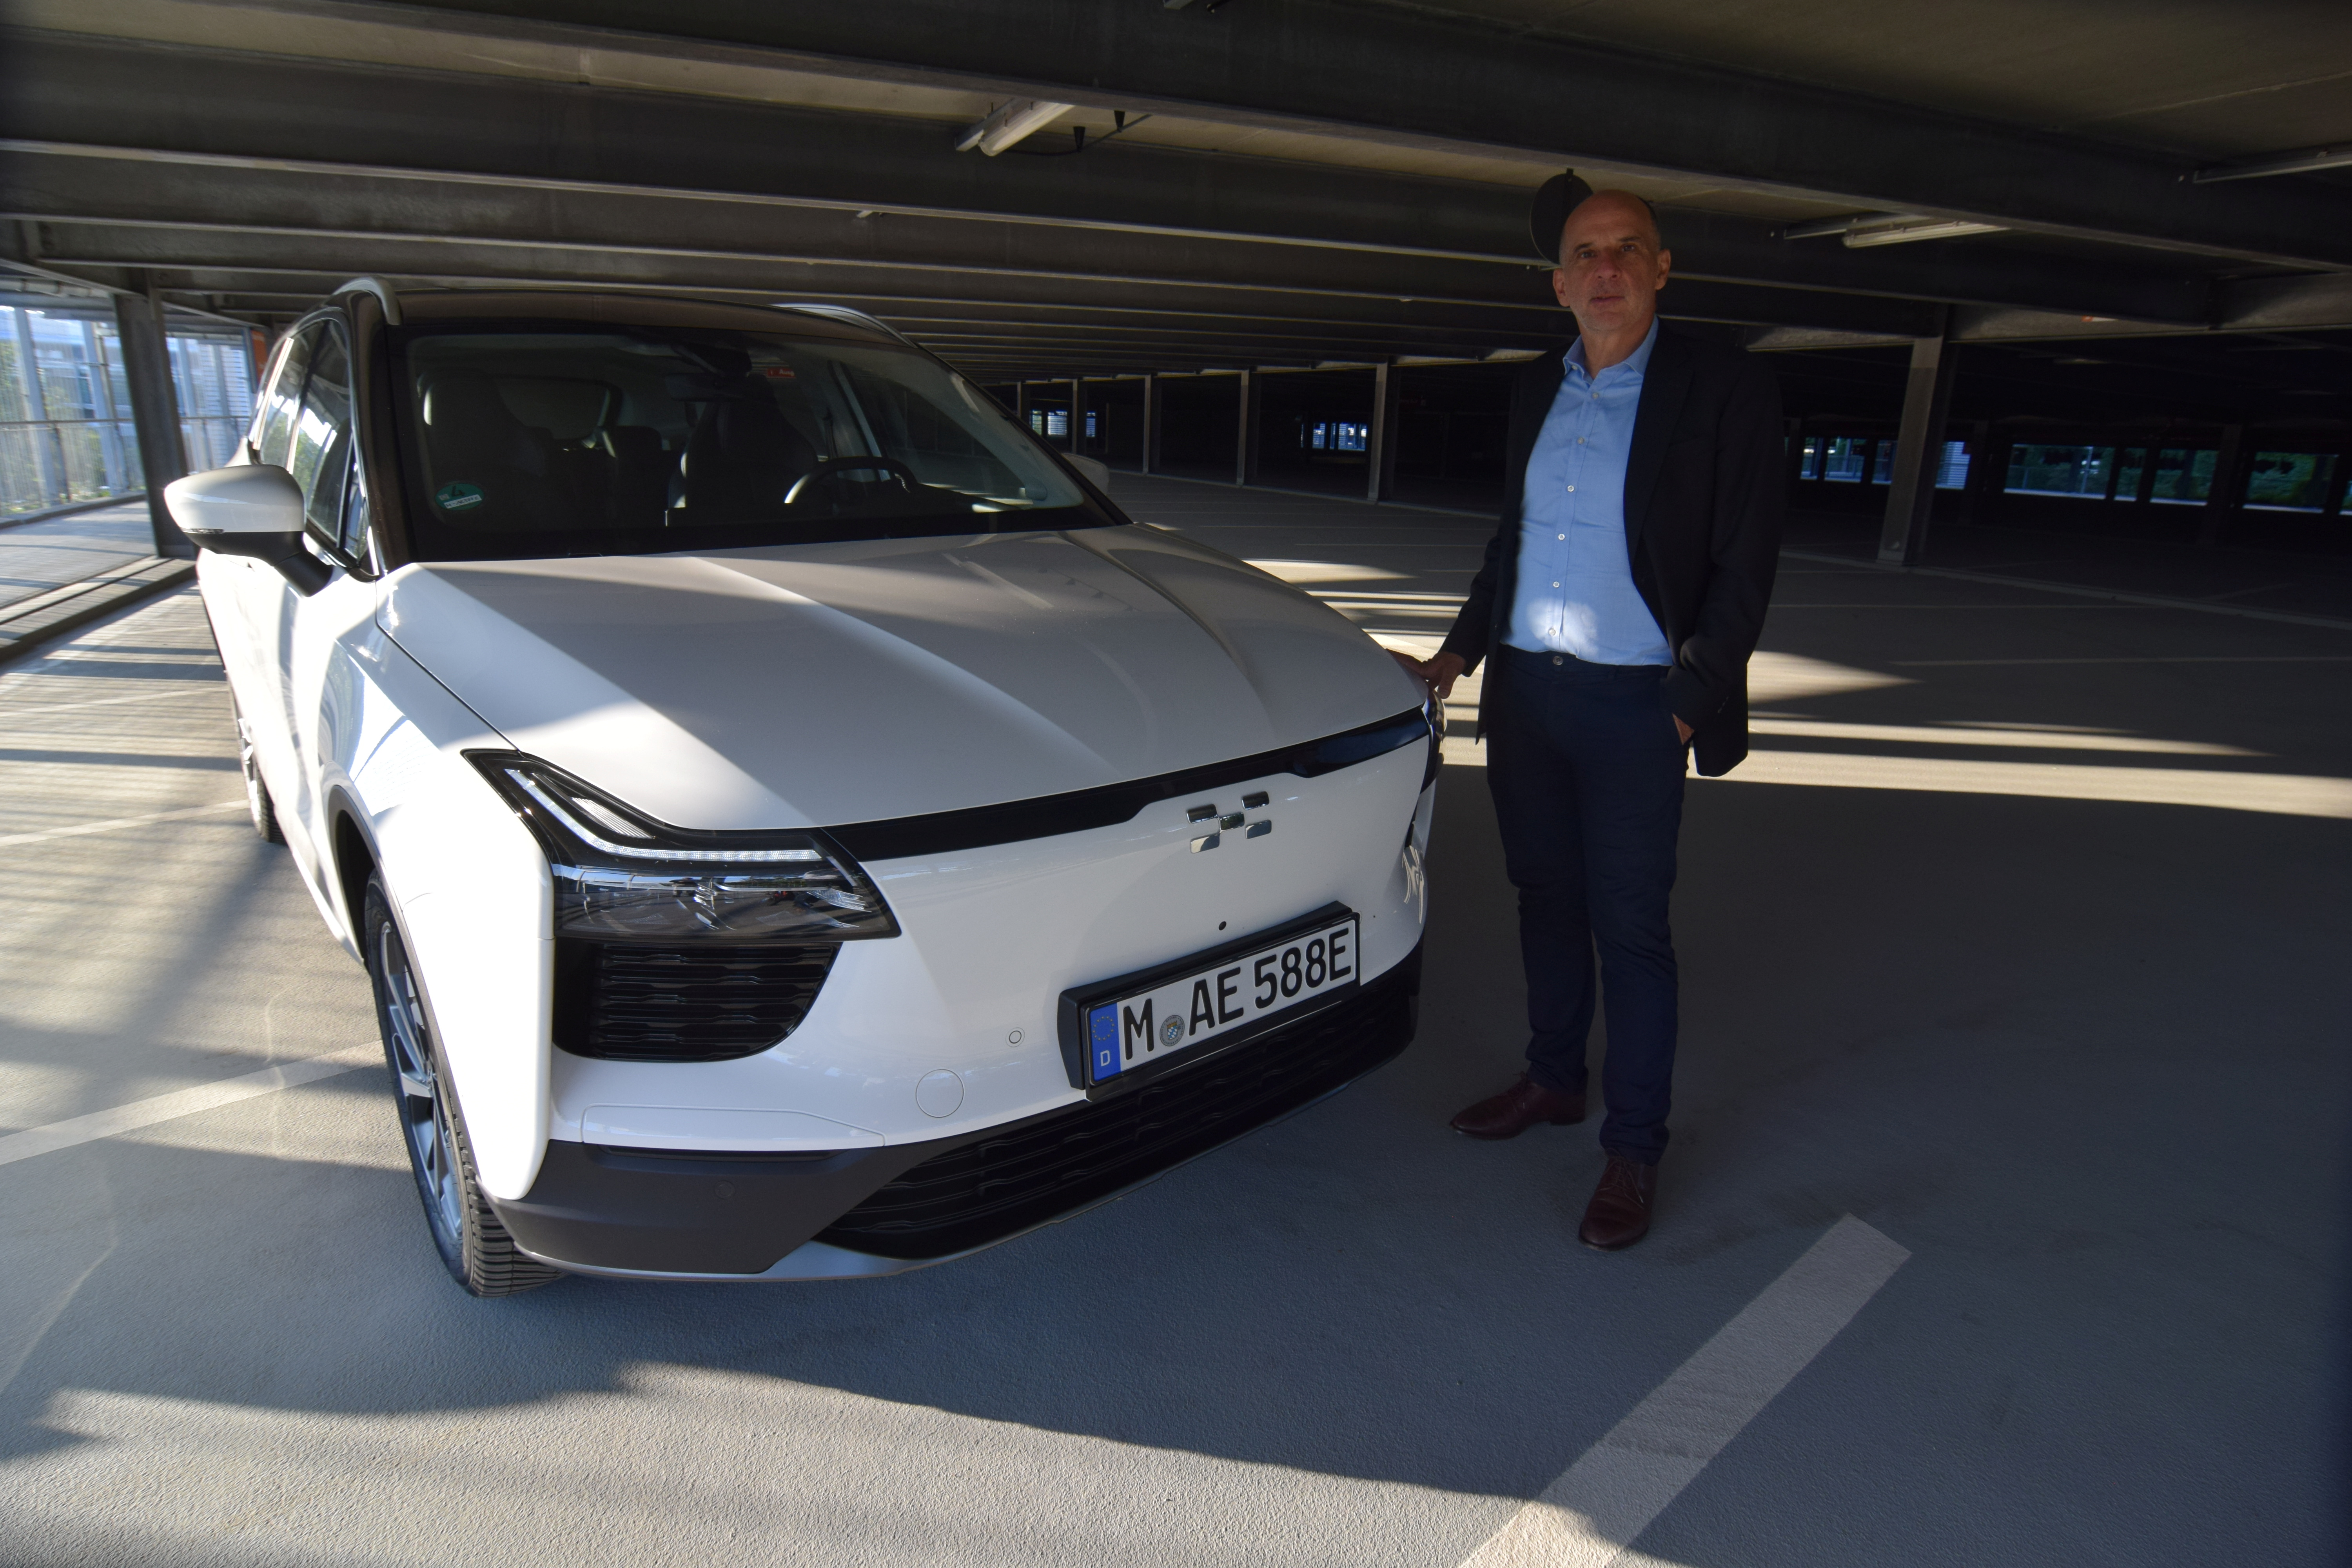 Aiways Executive Vice President Alexander Klose shows off the Chinese carmaker's electric U5 crossover SUV model, in Munich